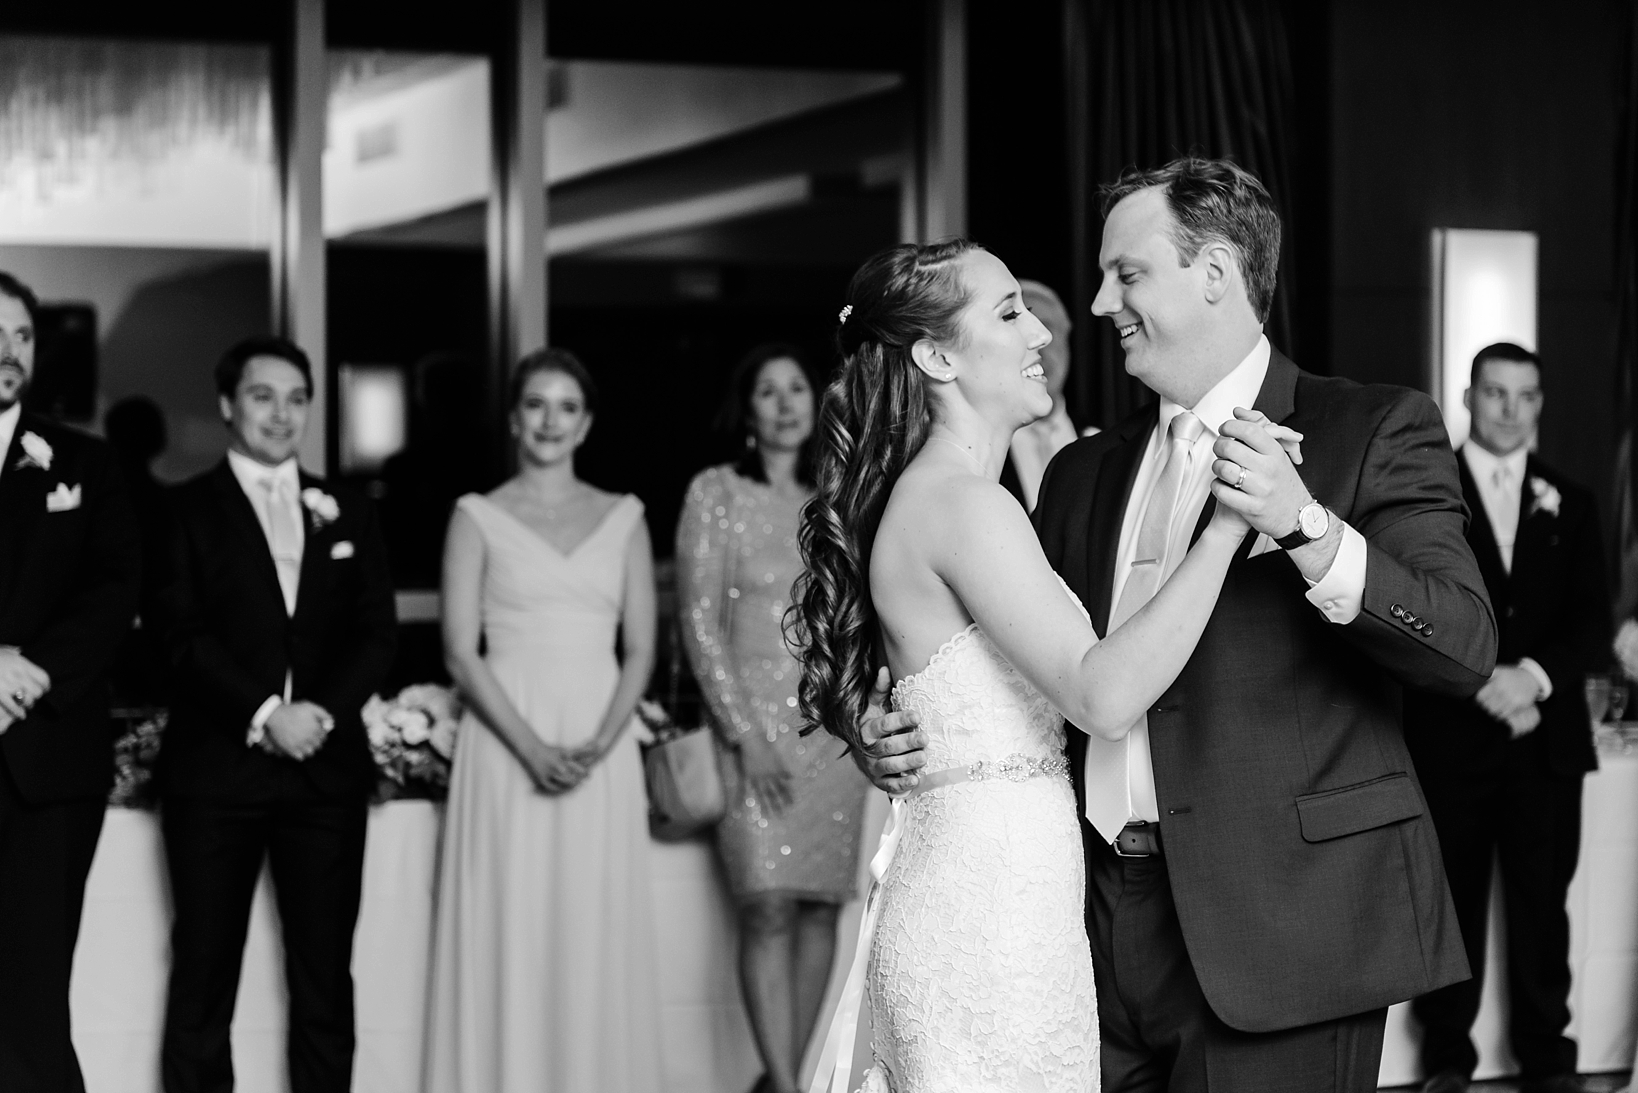 Black and White picture of the Bride and Groom dancing as the bridal party watches in the background